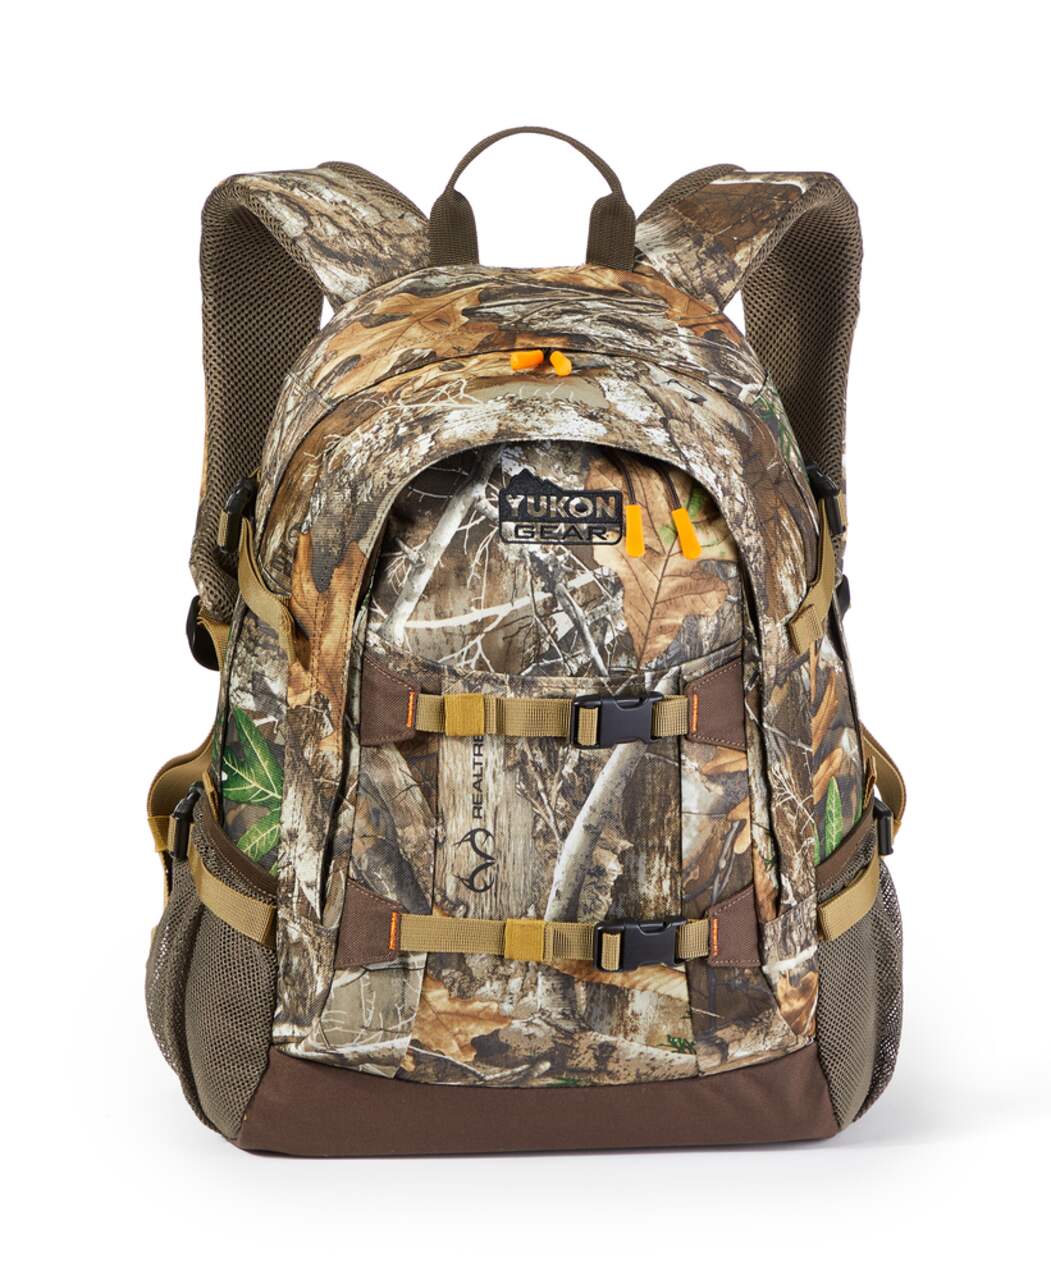 Sac à dos de chasse - Camouflage - MOJO Outdoors - ProChasse